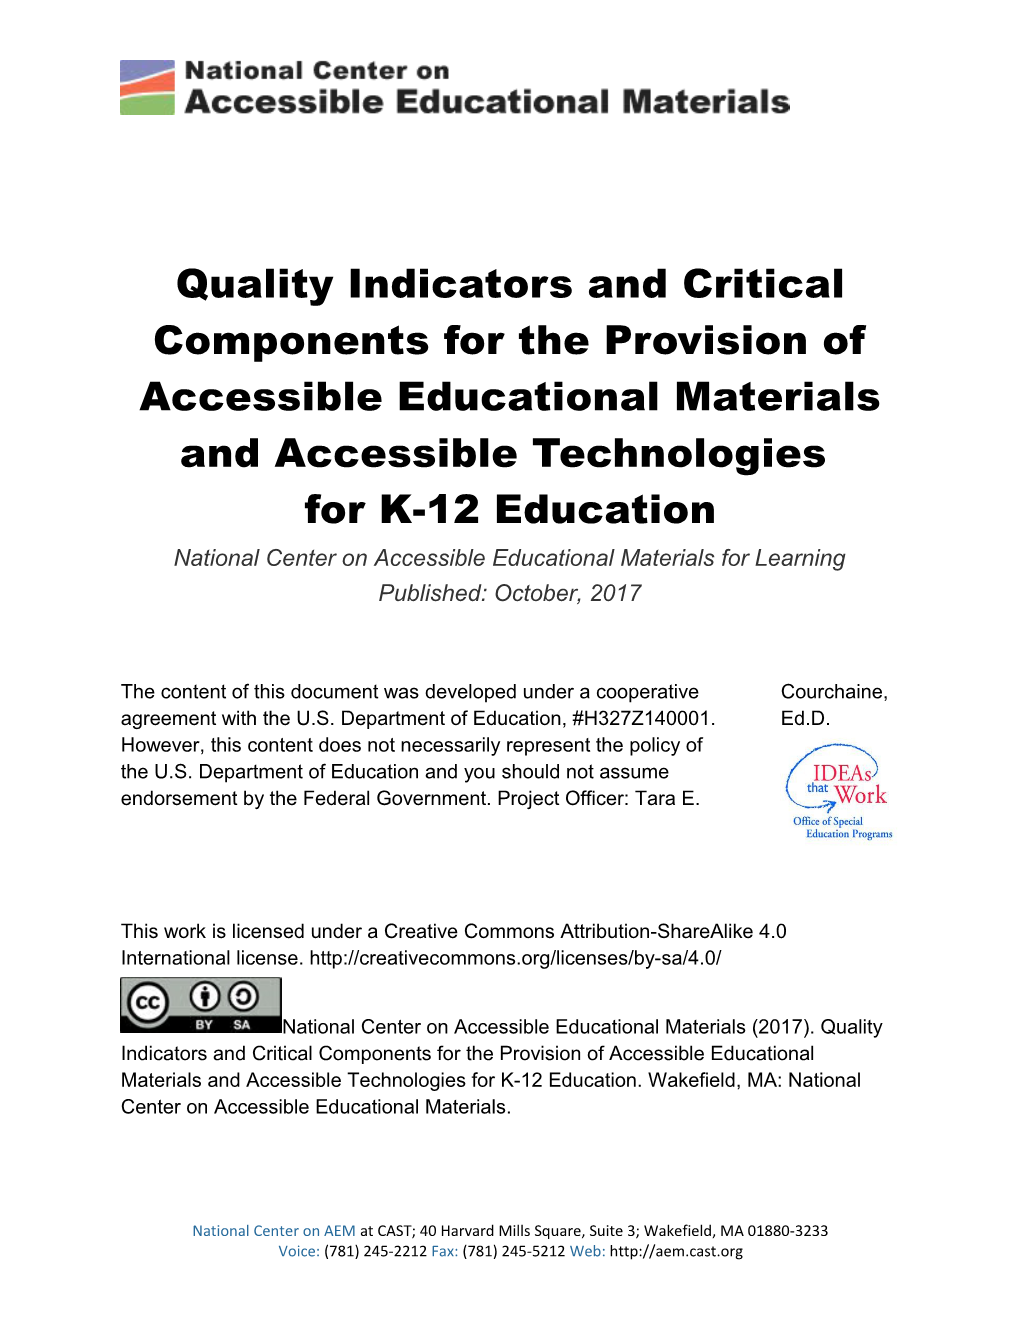 Quality Indicators and Critical Components for the Provision of Accessible Educational